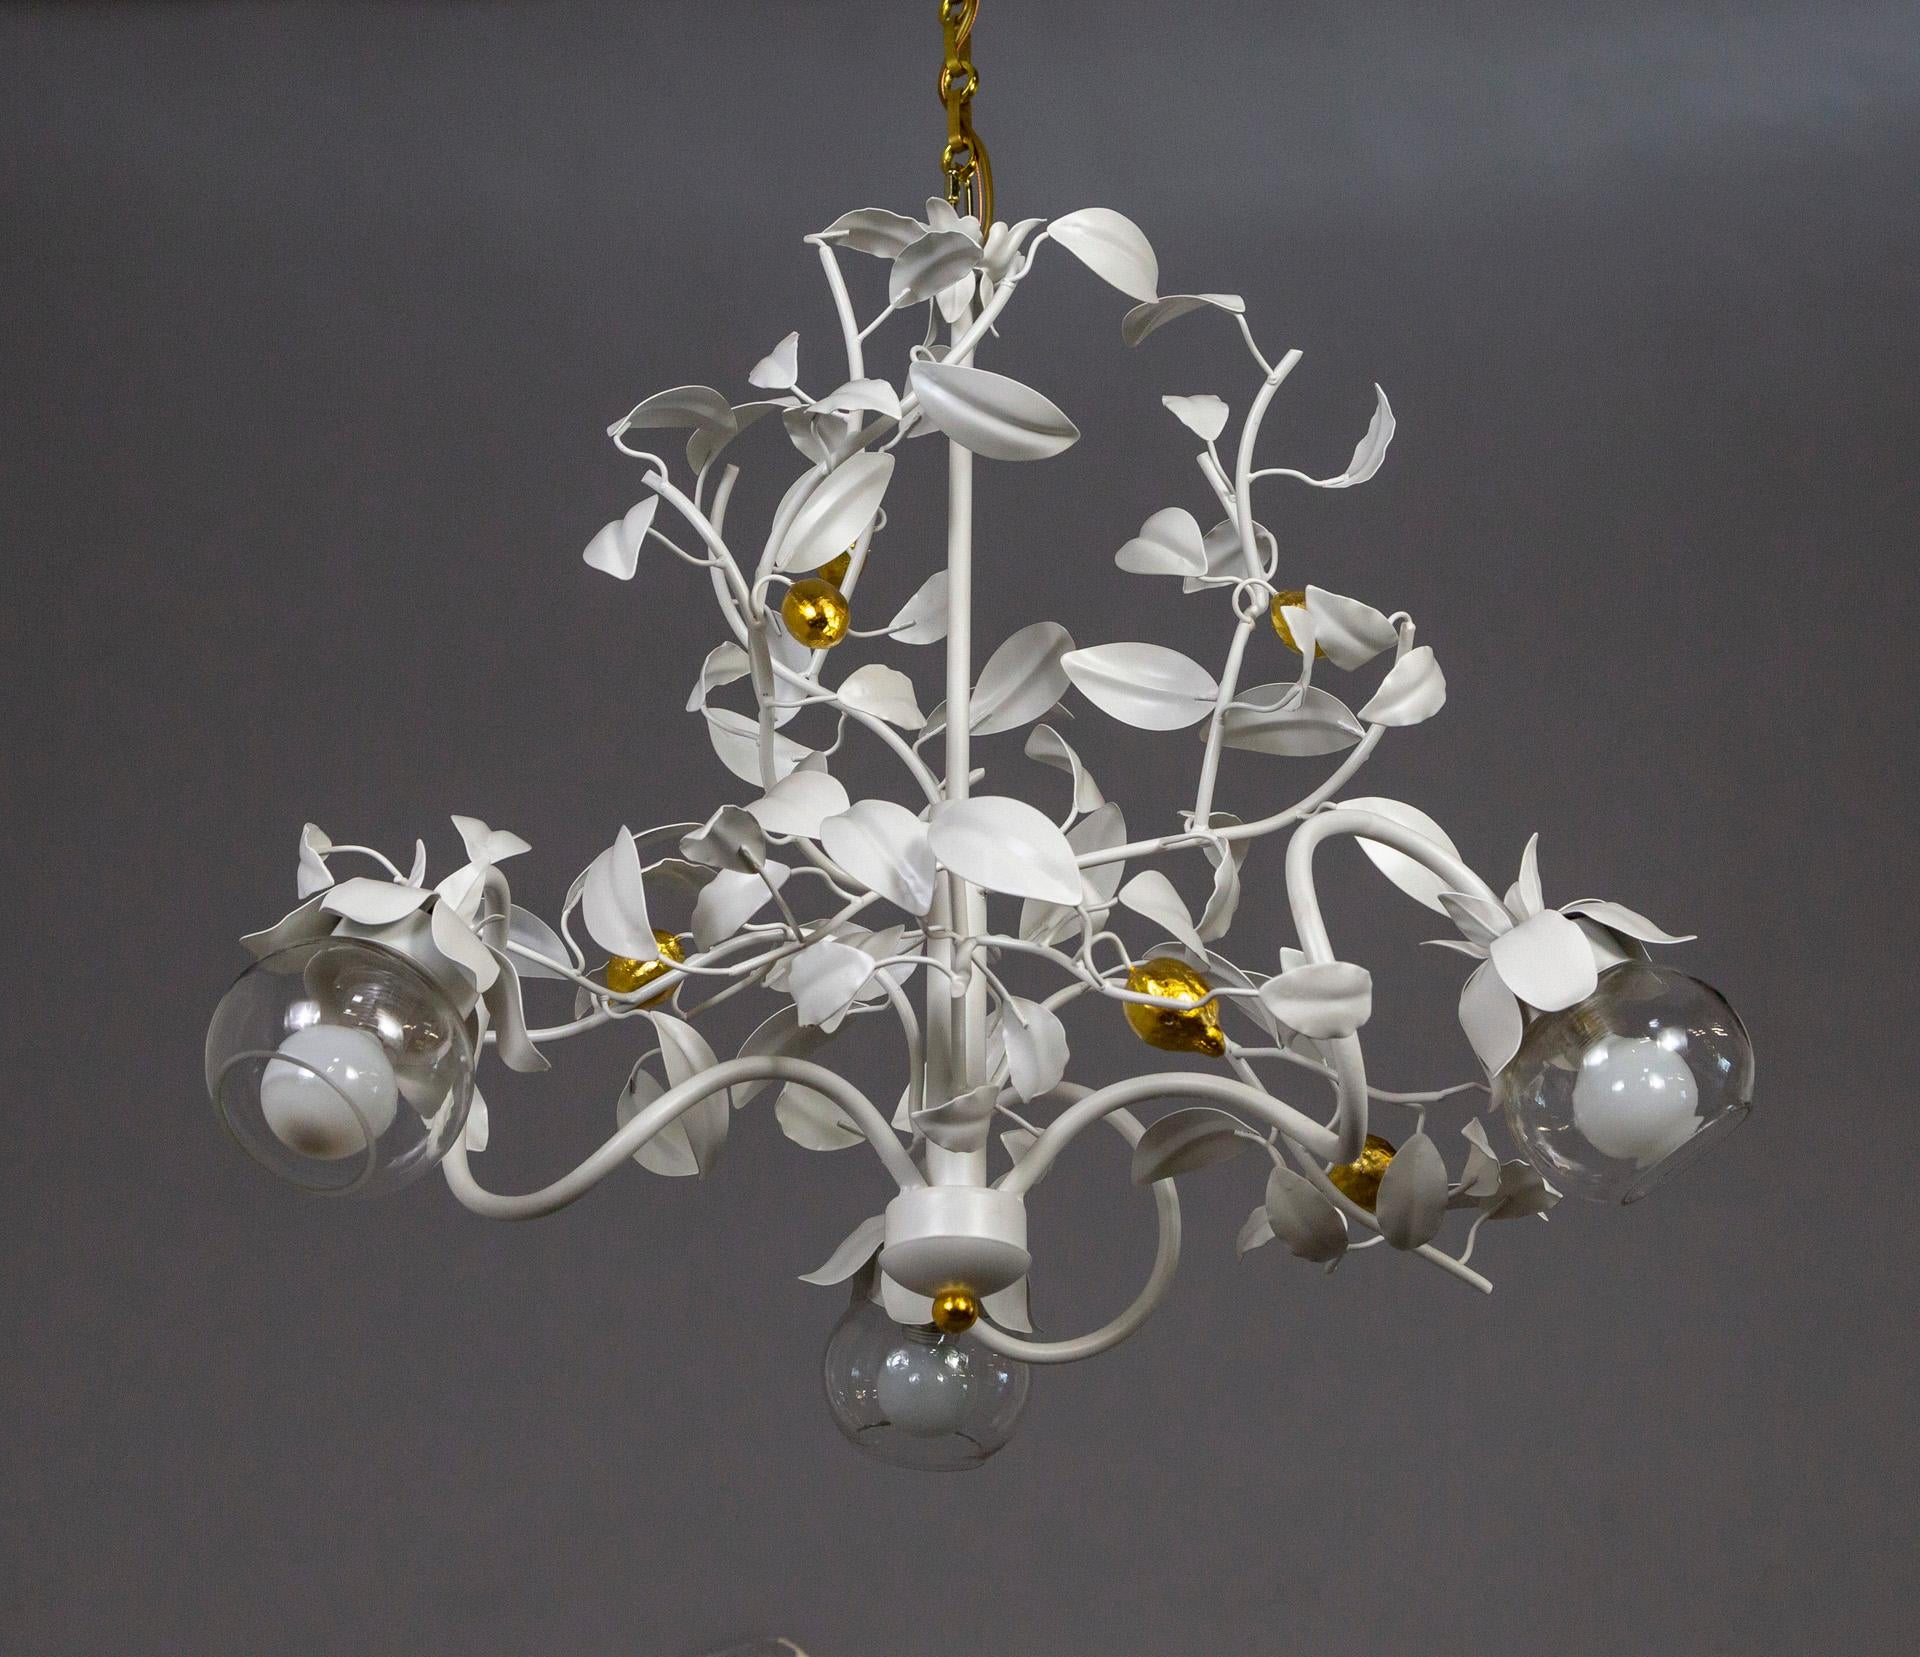 A newly restored, white lacquered chandelier with 3 curling arms and many swooping vines filled with leaves around the center stem and accented with gilded lemons throughout. The 3 lights have glass globe shades and candelabra sockets; with a long